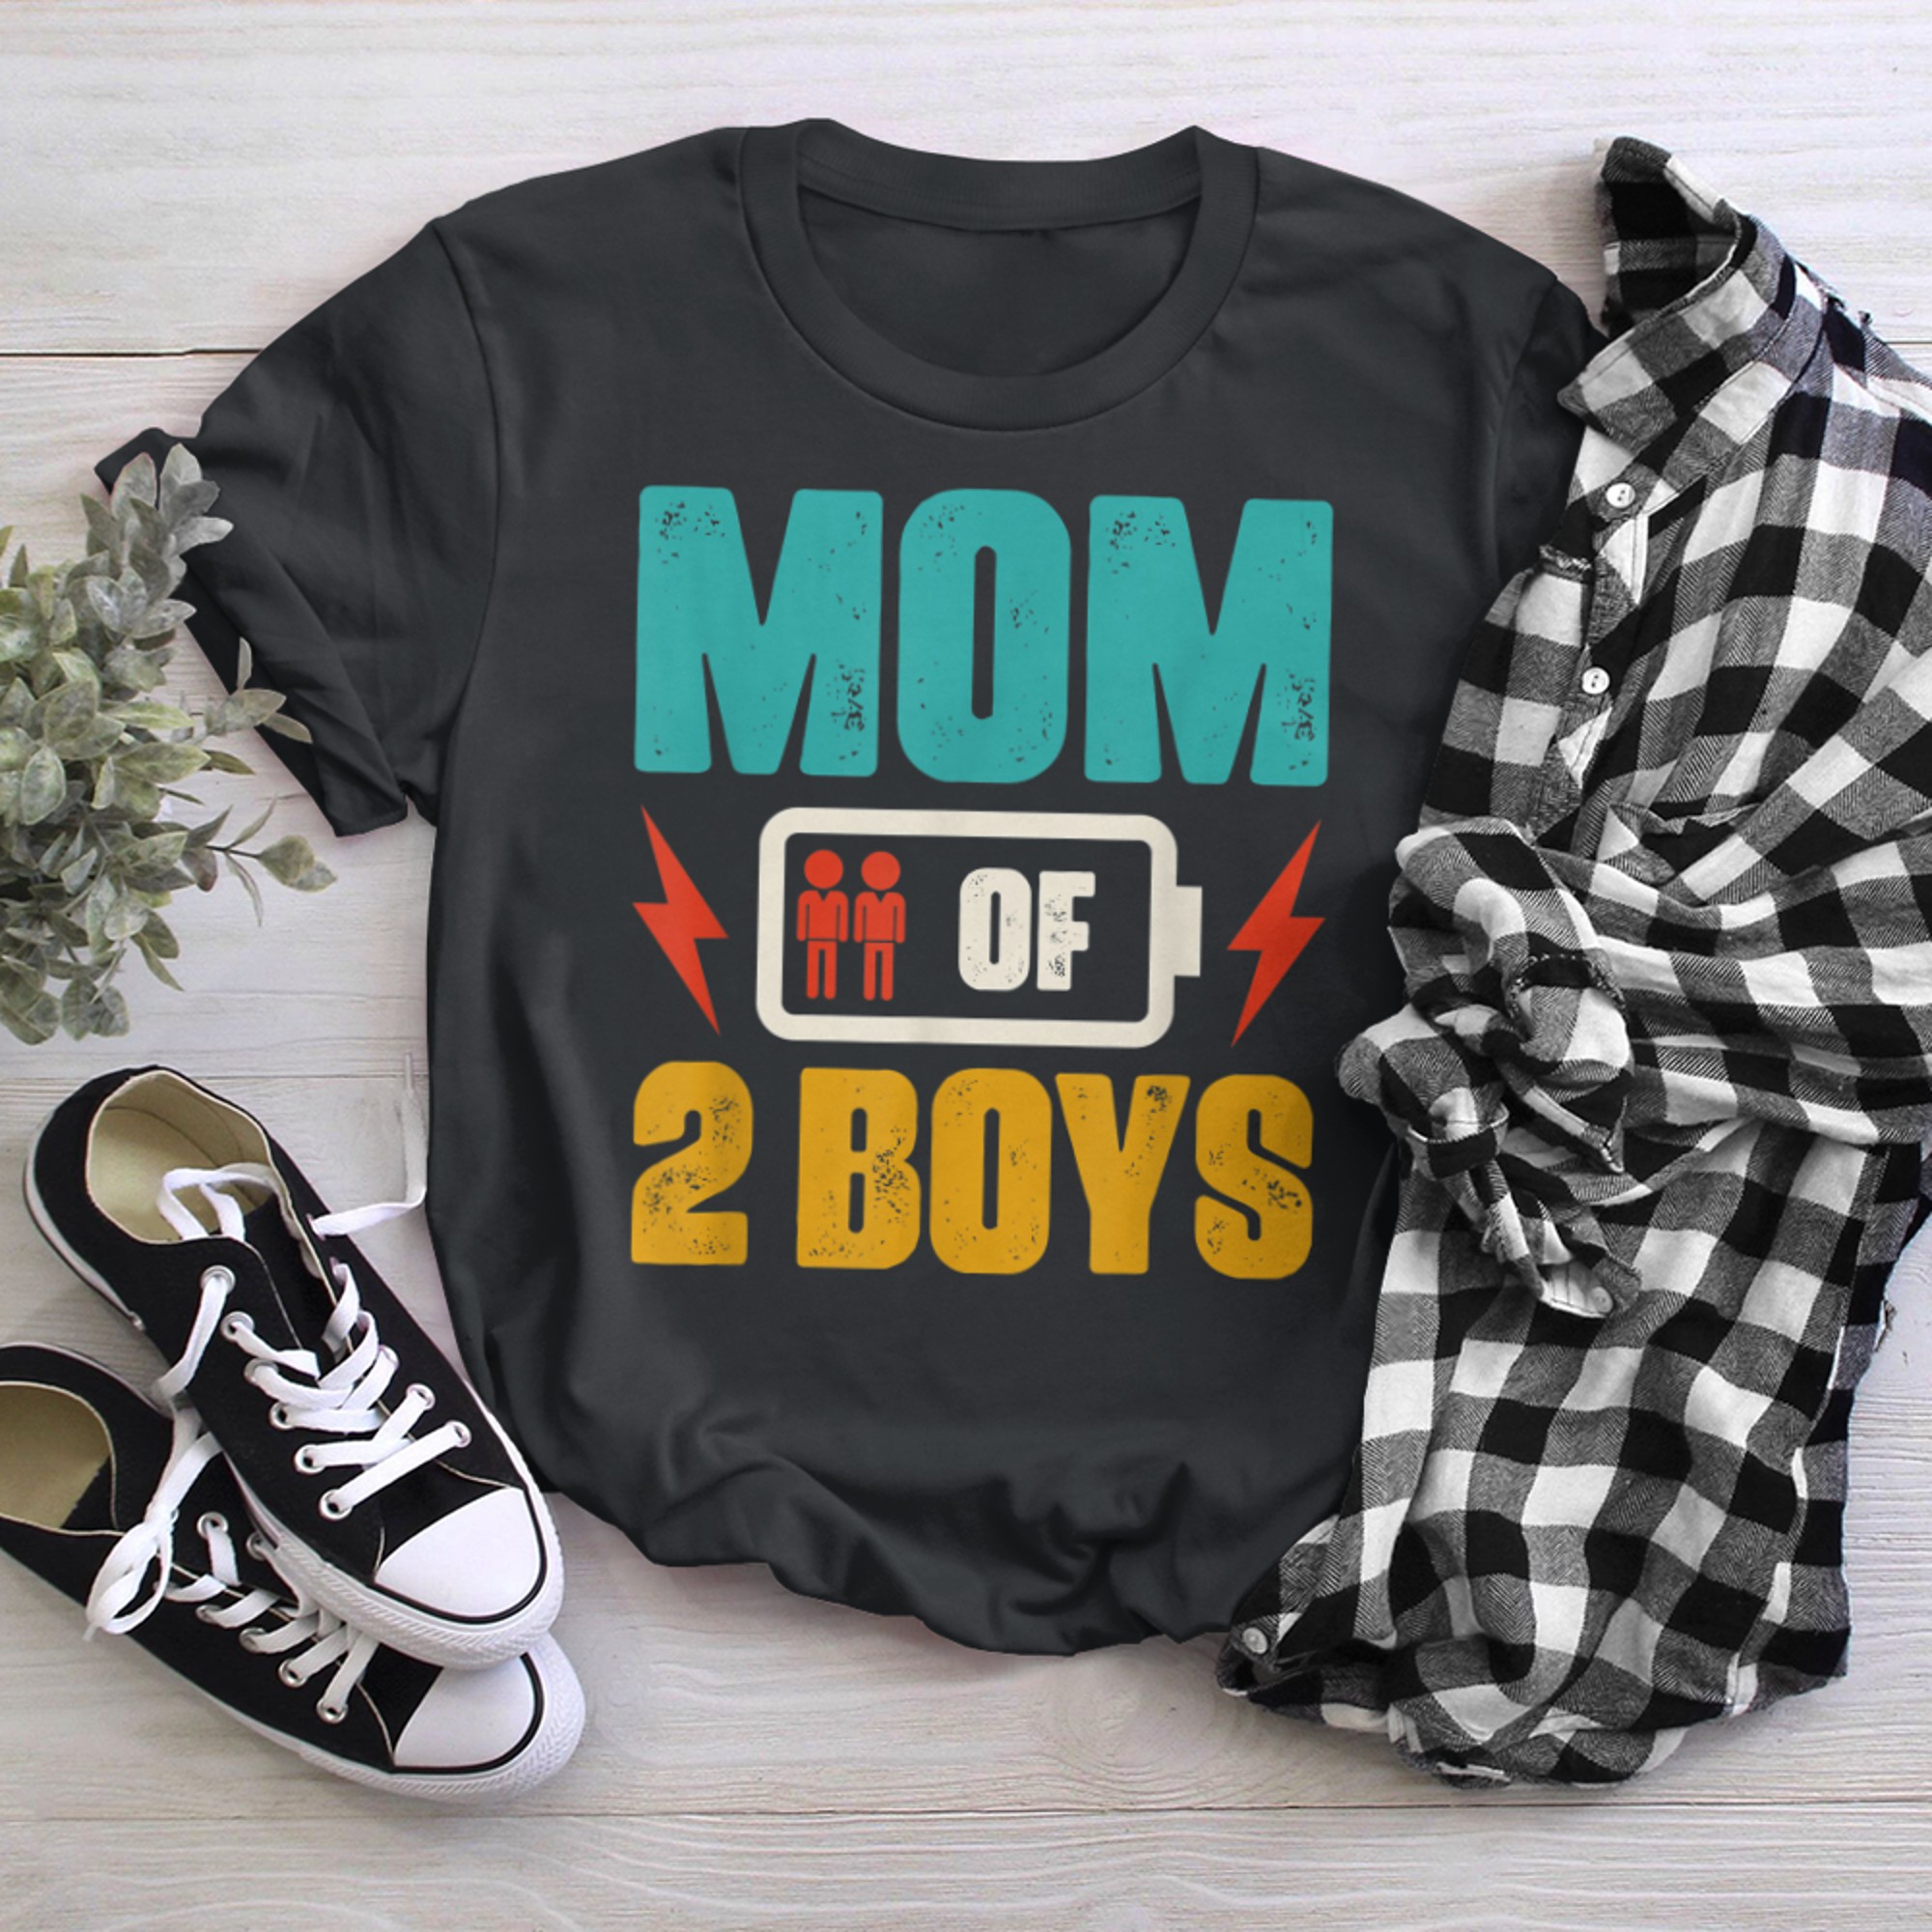 Mom of from Son Mothers Day Birthday (4) t-shirt black